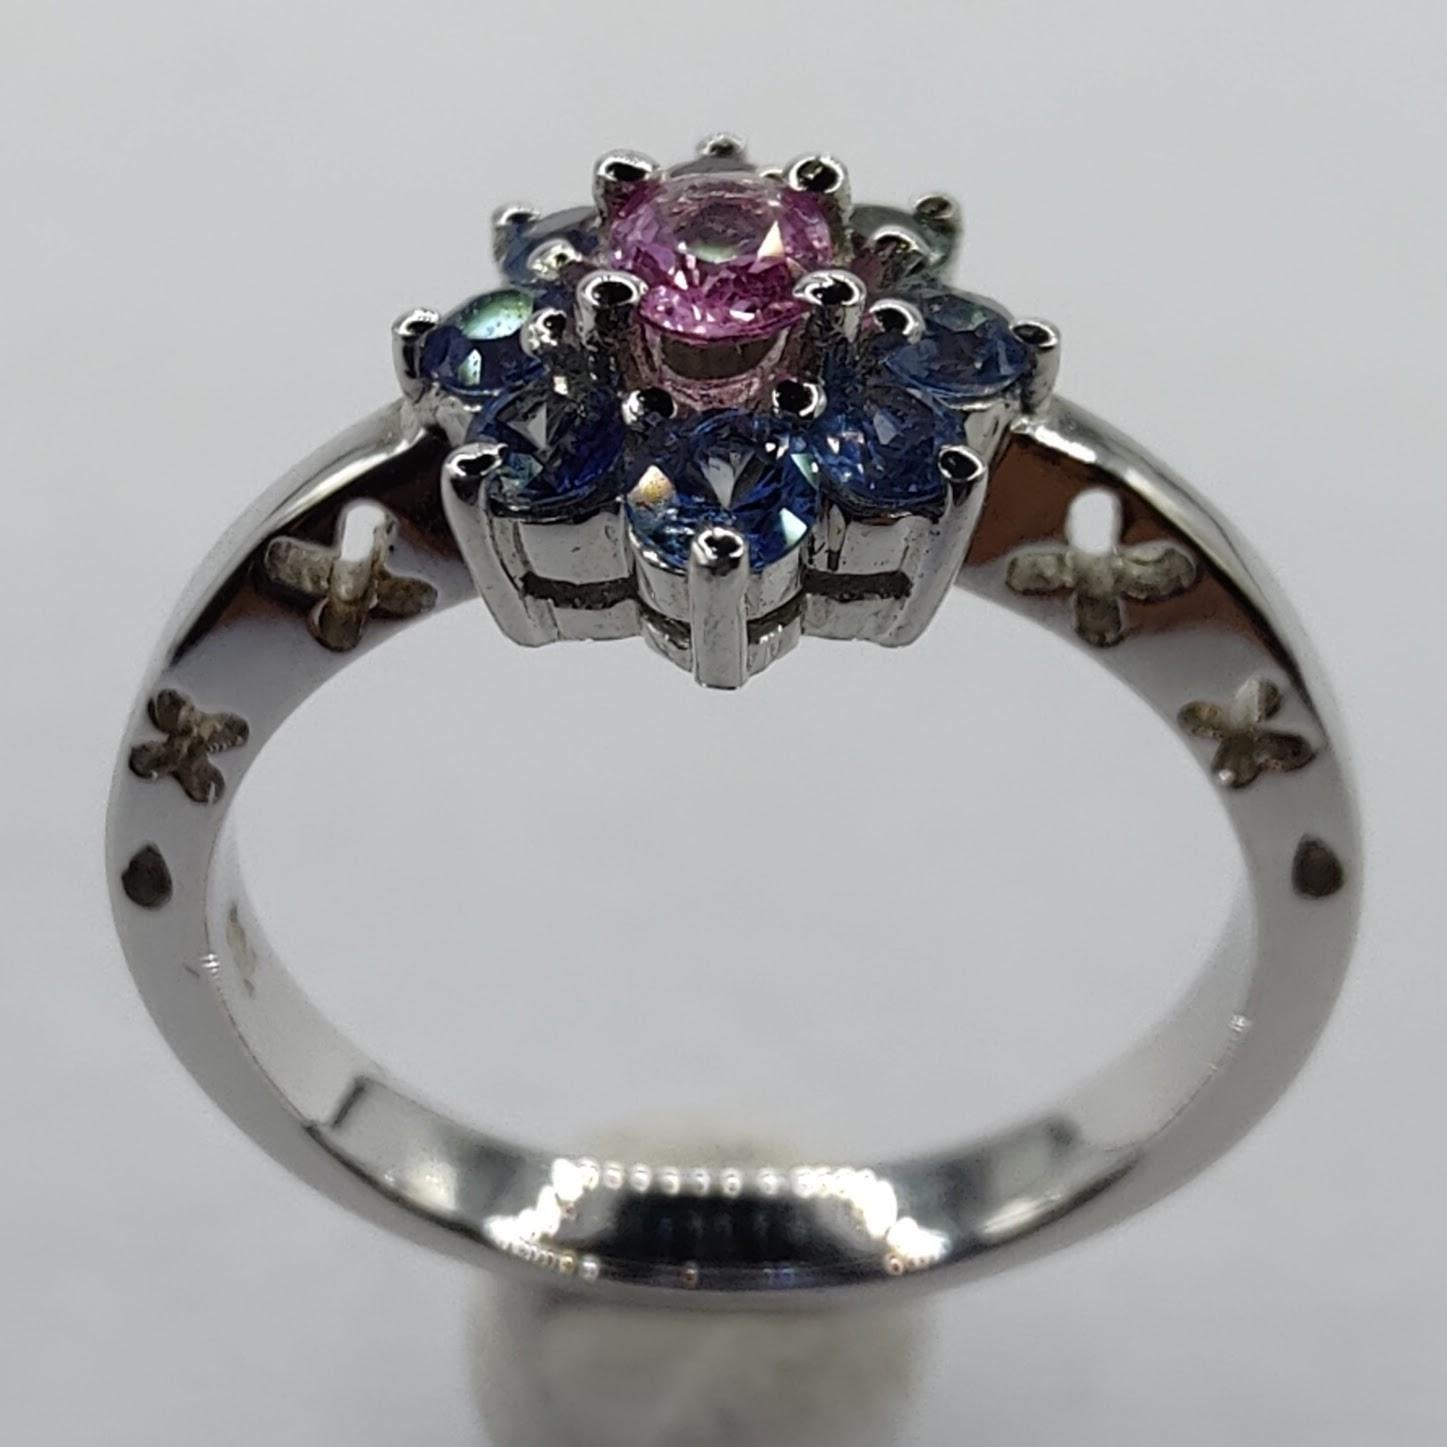 This stunning cocktail ring is the perfect choice for adding a pop of color and unique detail to your look. The ring features a beautiful flower design of 0.83 carats of sapphires, with an oval cut pink sapphire in the center, surrounded by a halo